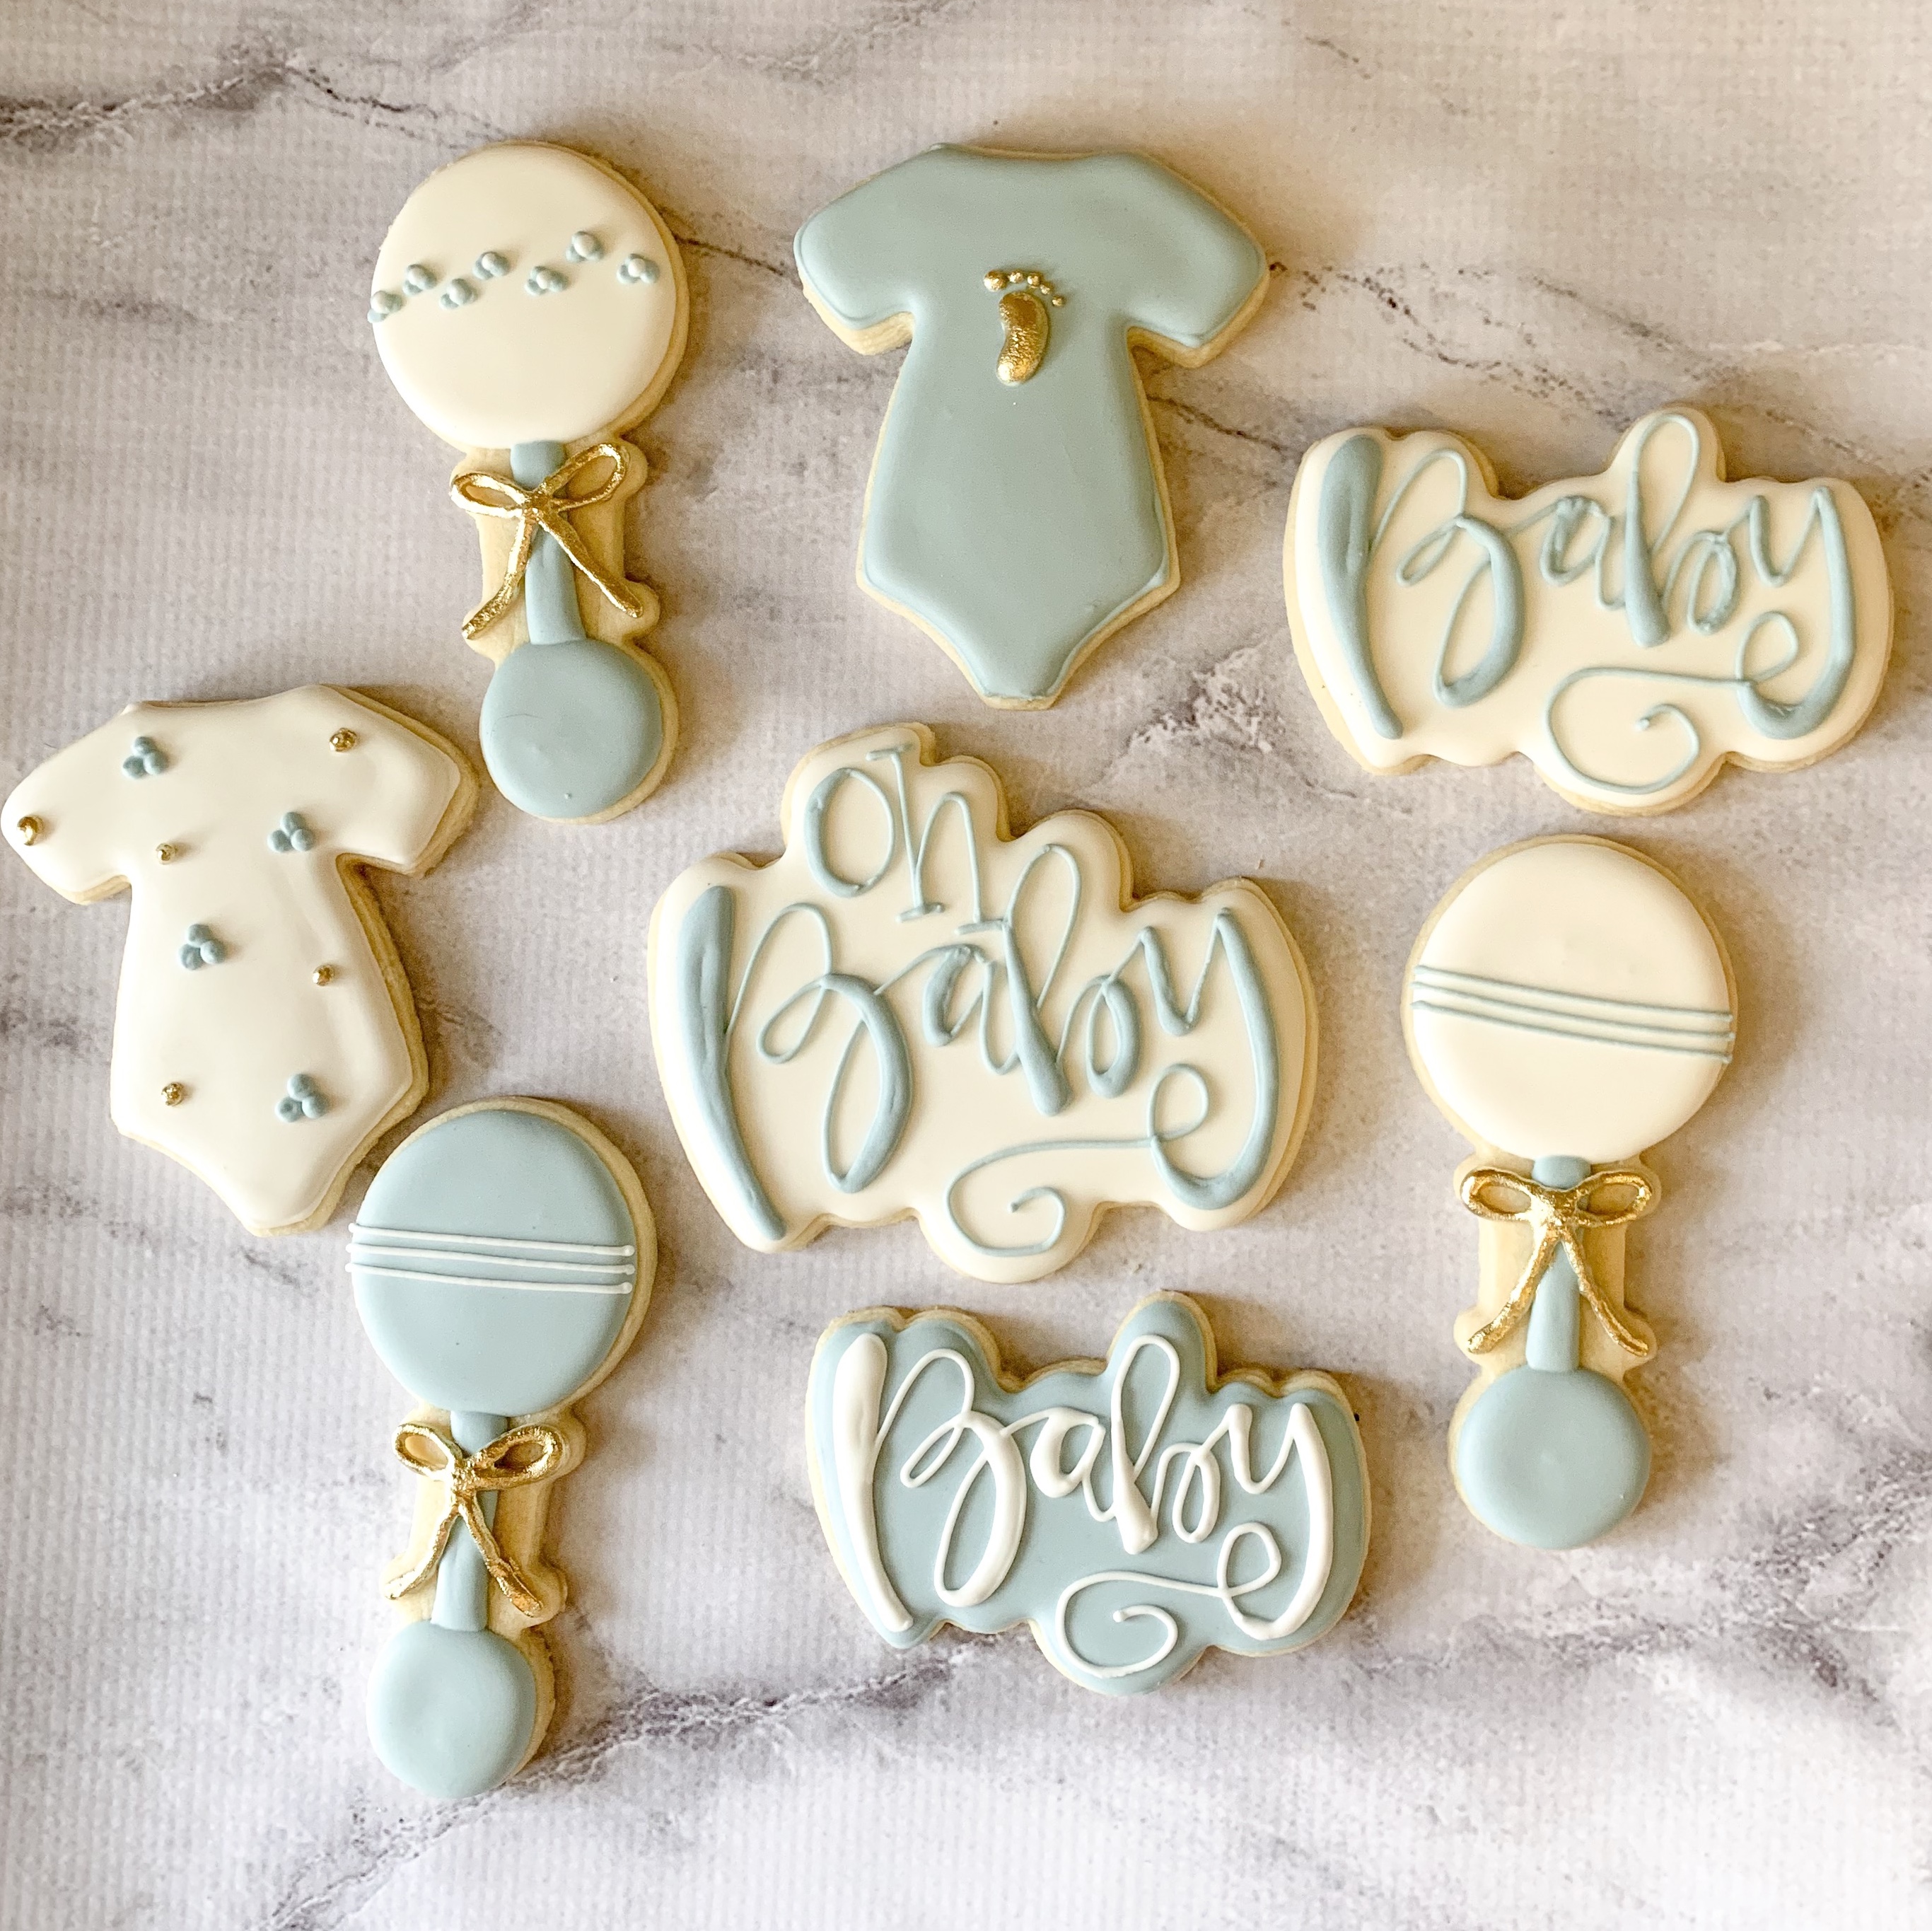 Picture of blue and white baby shower cookies.